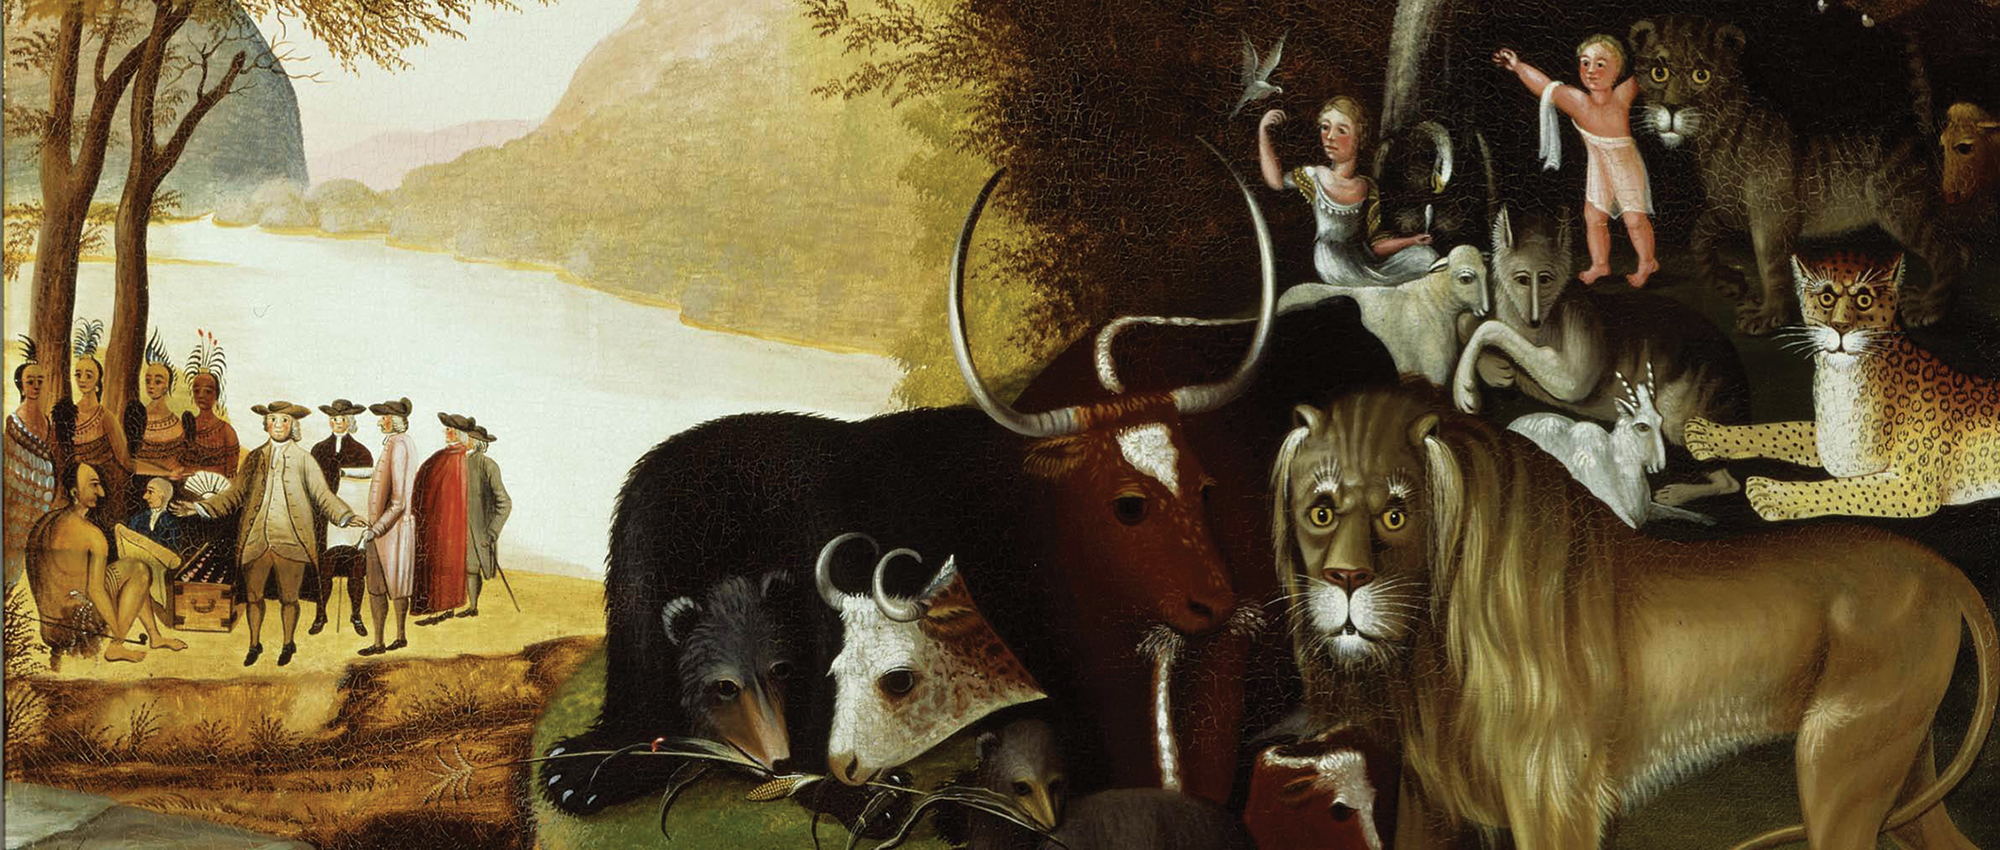 A detail of a painting depicting people and animals